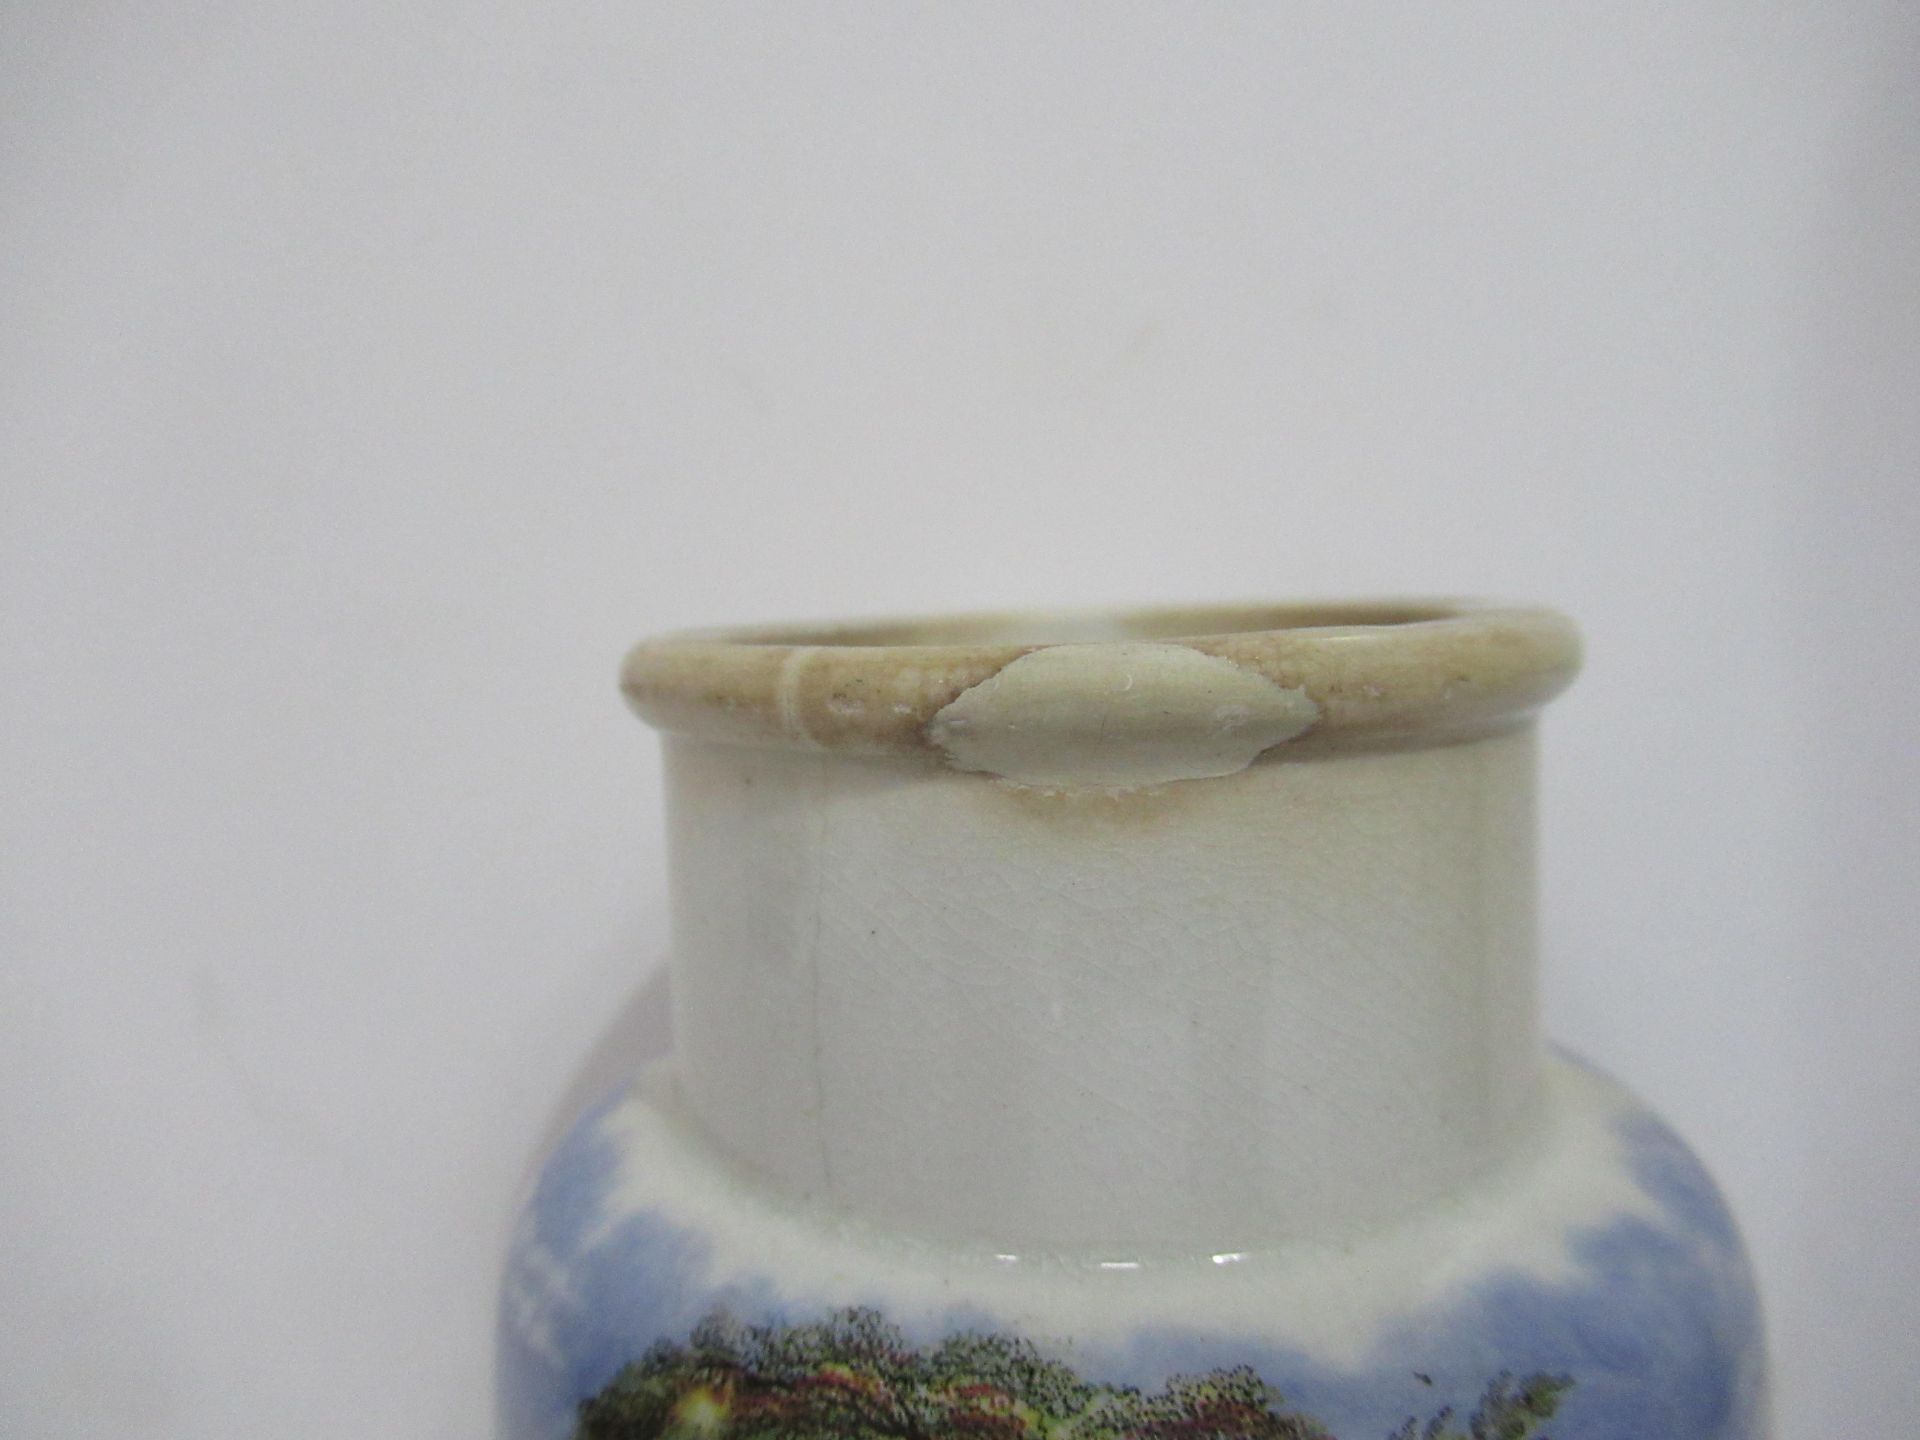 6x Prattware painted jars including one depicting Venice - Image 32 of 42